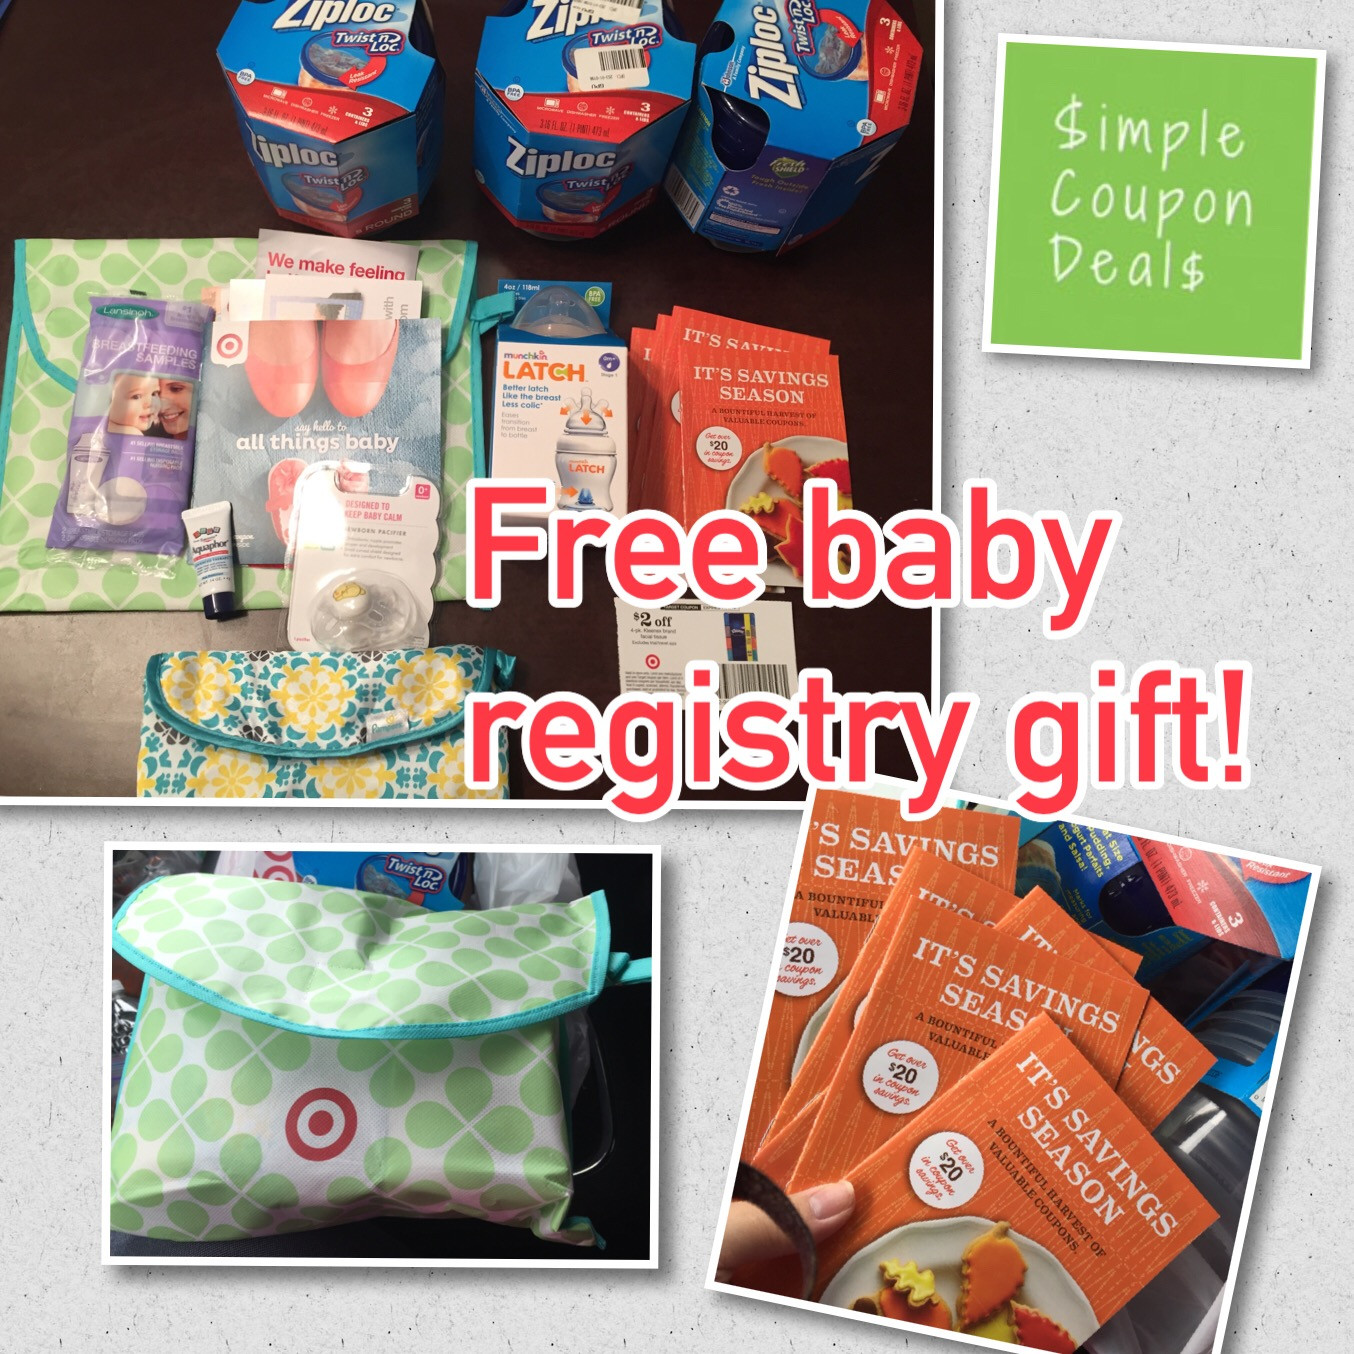 Target Baby Registry Free Gift
 Expired Free Baby Registry Gift Pack from Tar and free